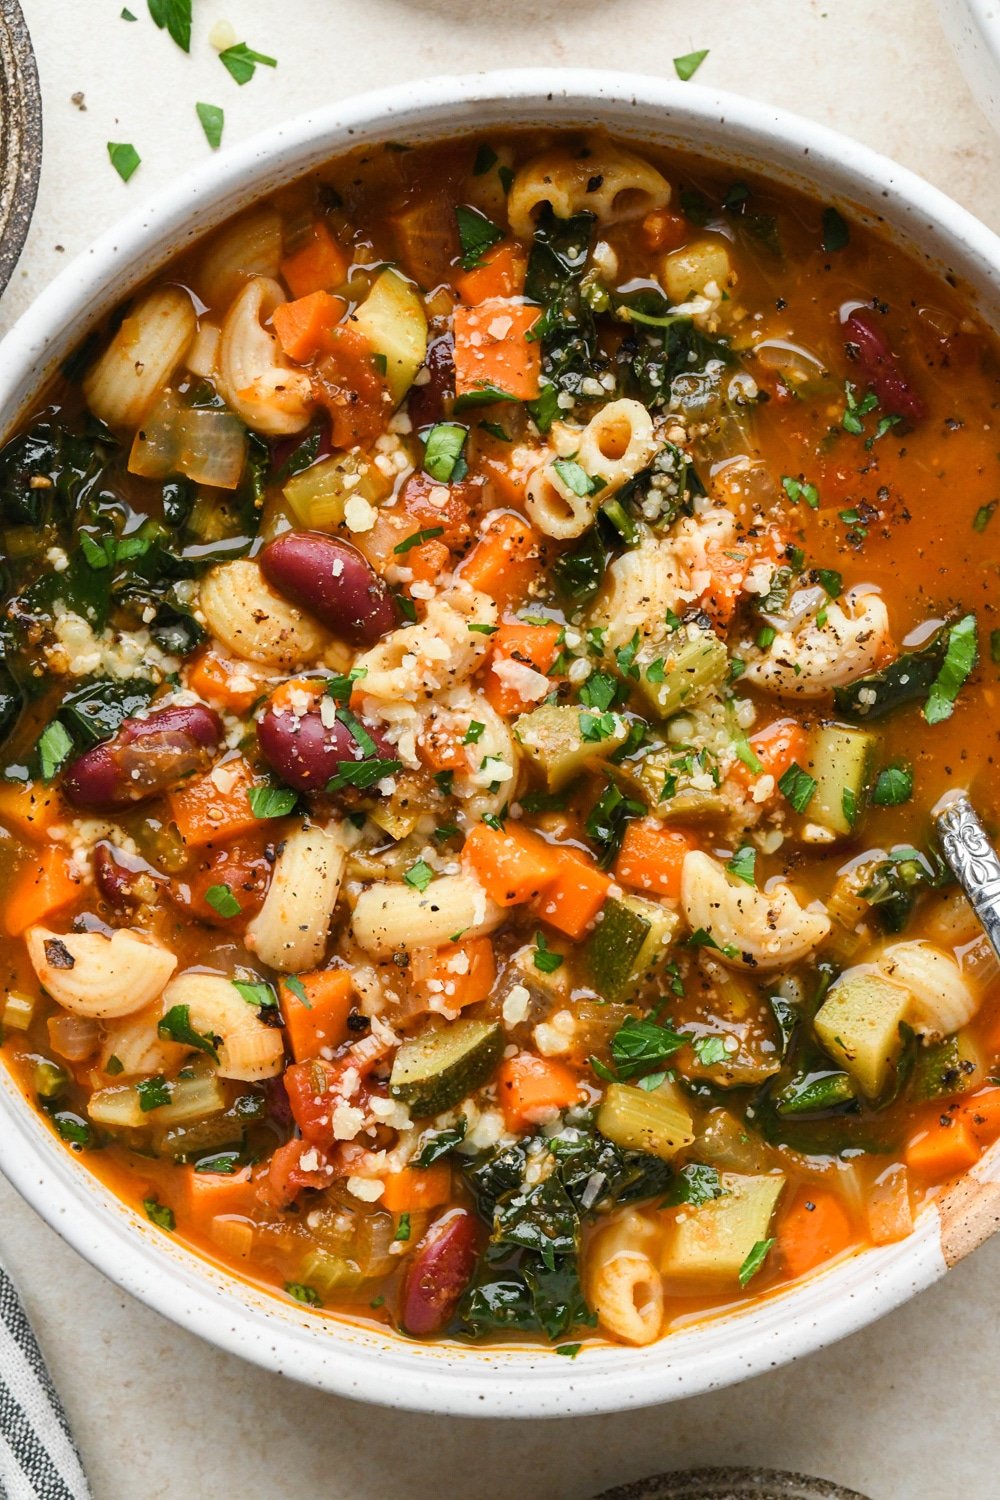 Gluten free minestrone soup in a large soup bowl topped with fresh parsley and grated parmesan, with a spoon lifting out a bite of the soup to show the ingredients.